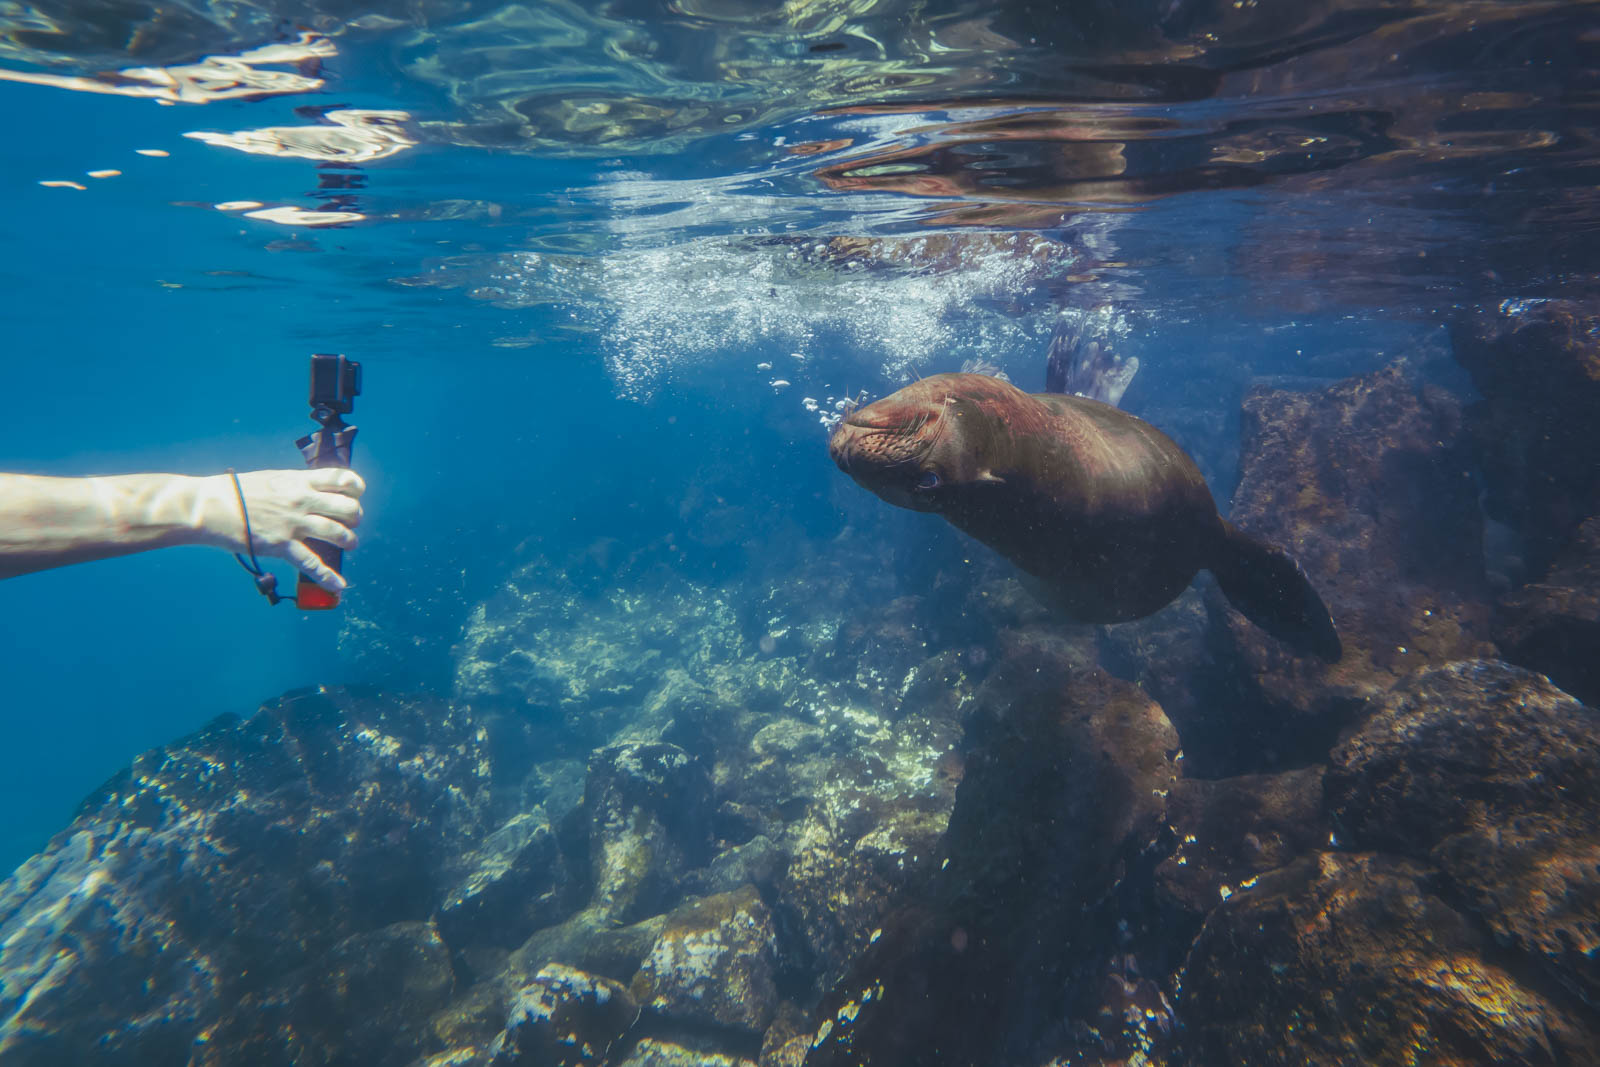 Expedition Cruises The Galapagos Islands